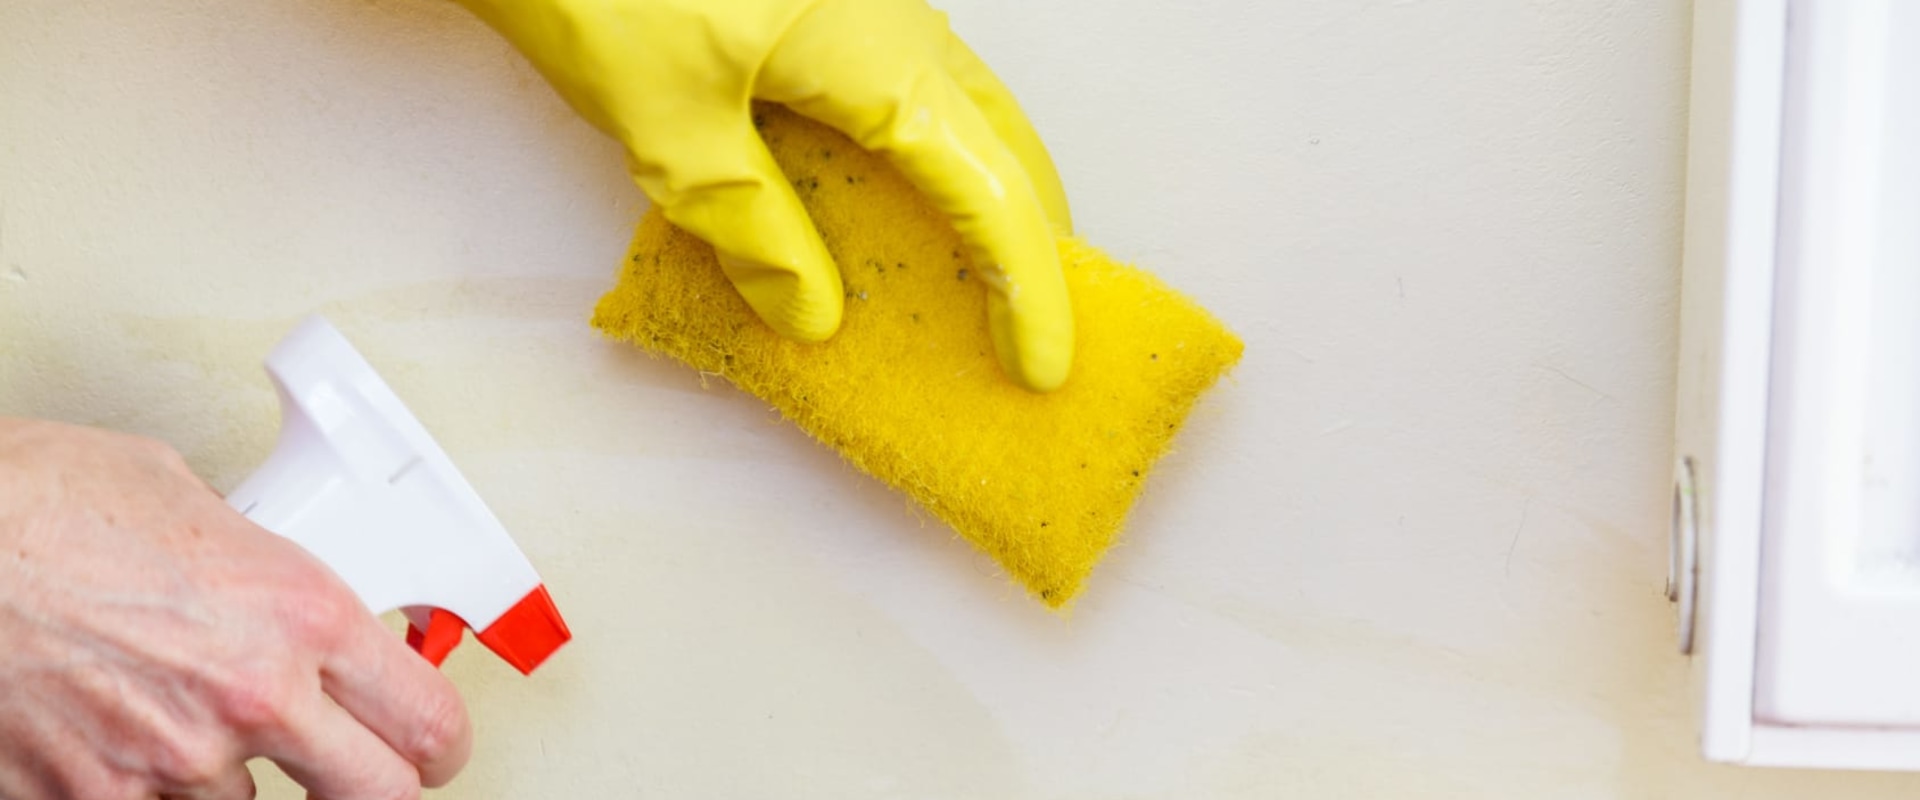 Should I Stay Home During Mold Remediation?